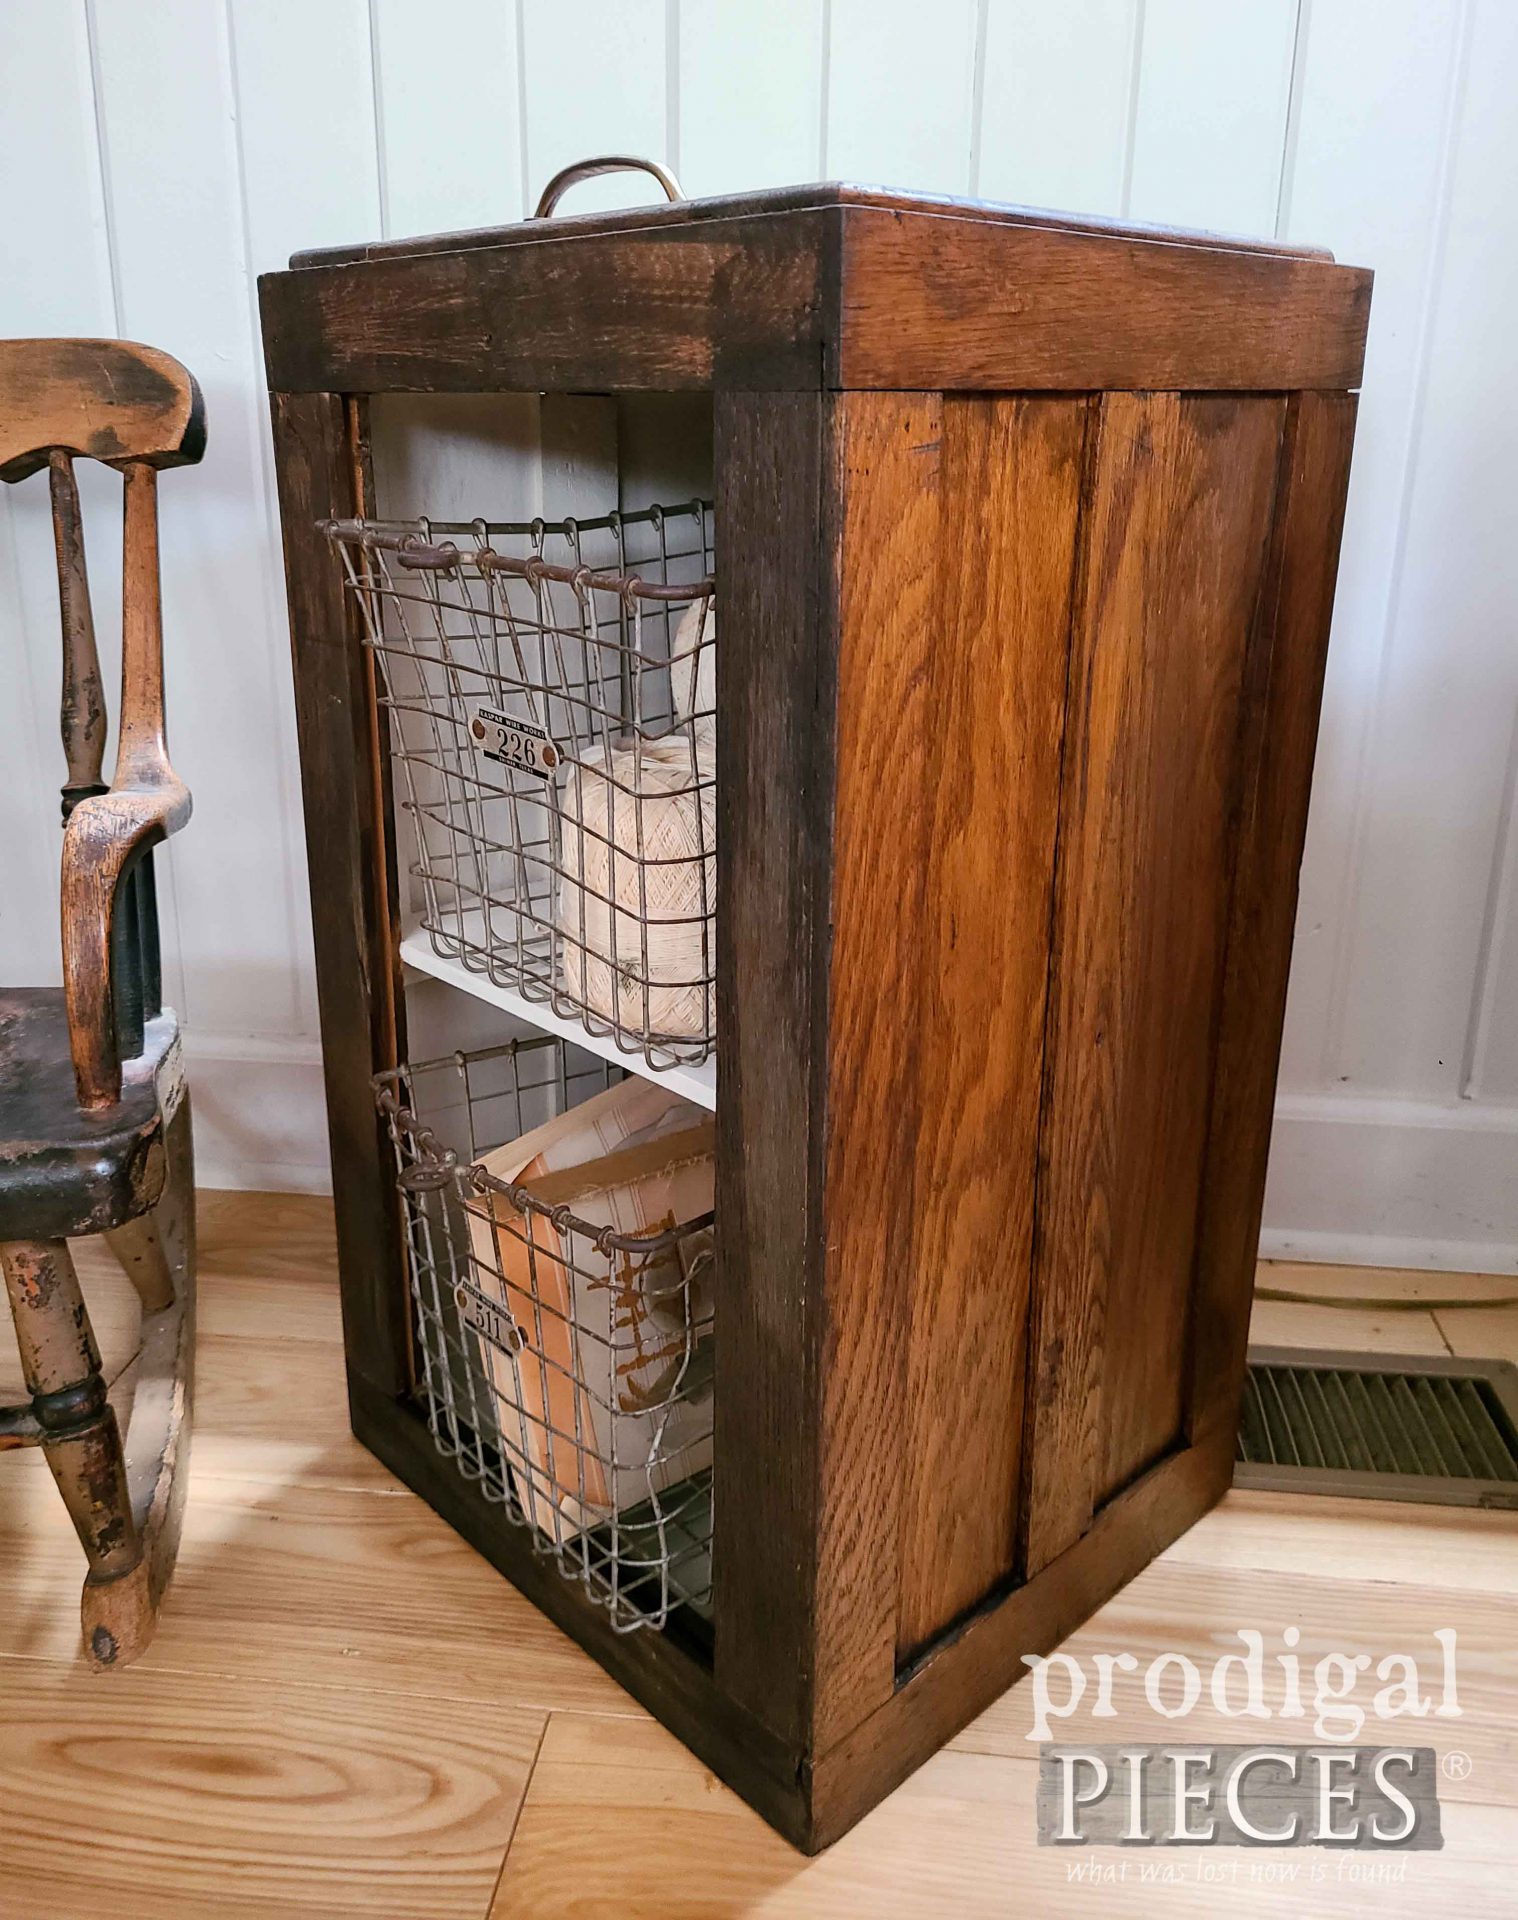 Side View Filing Cabinet | Prodigal Pieces | prodigalpieces.com #prodigalpieces #farmhouse #rustic #industrial